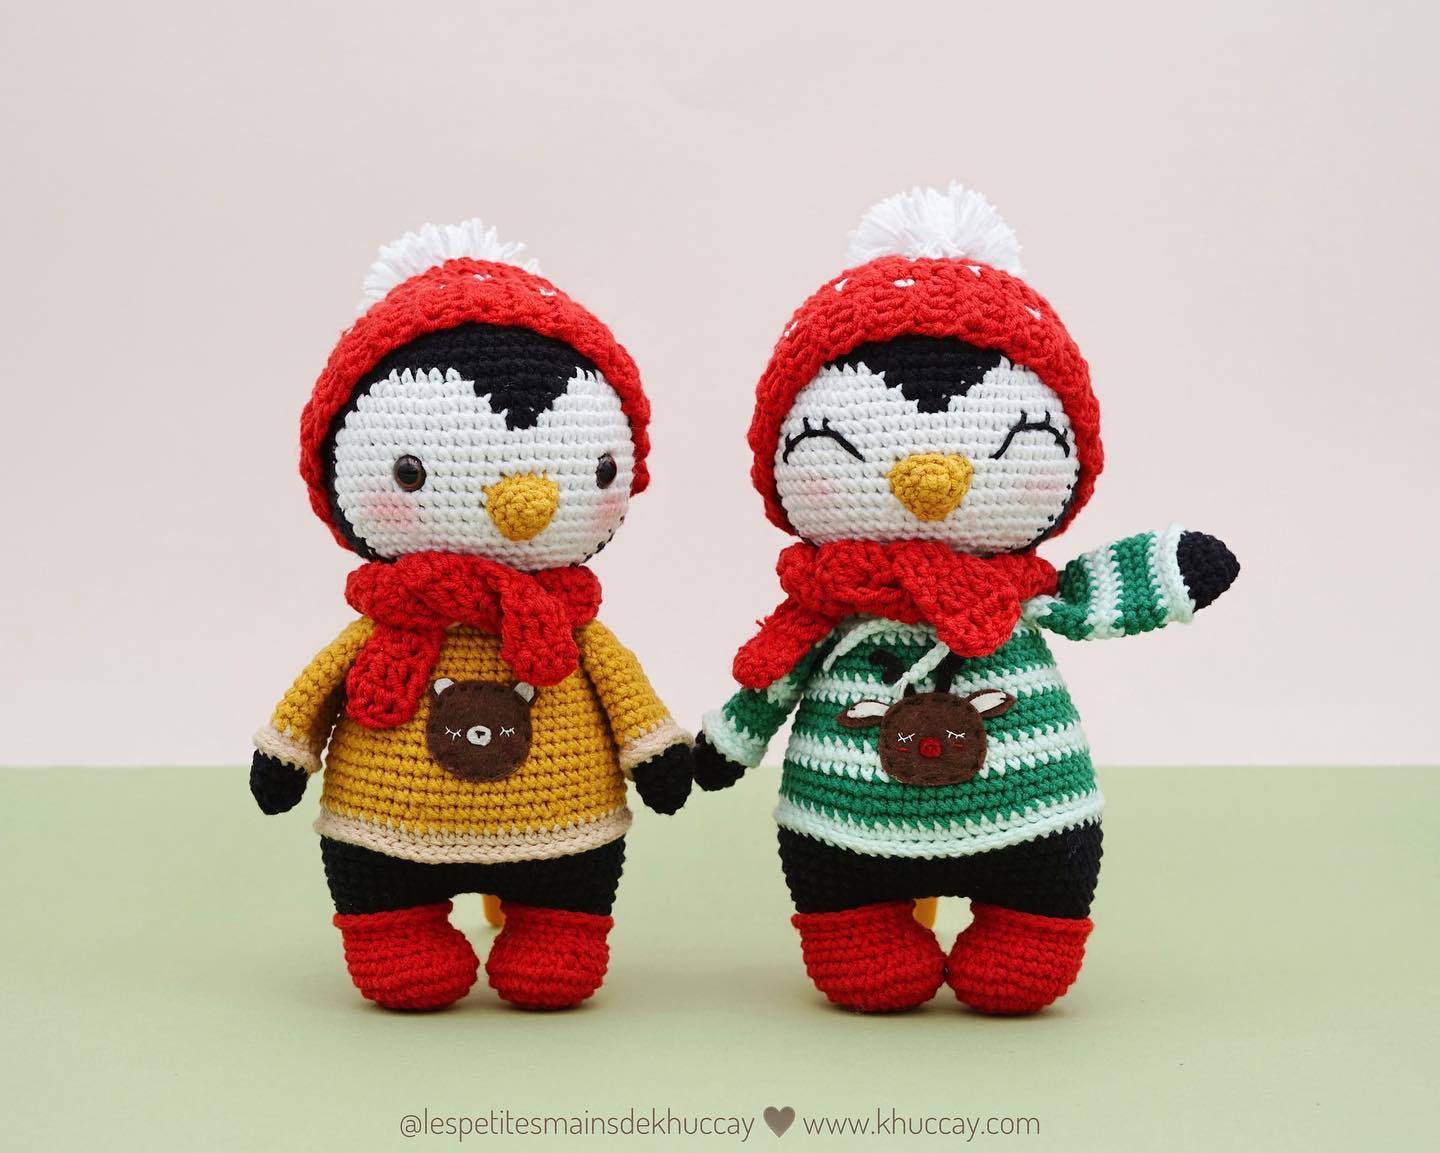 … and, other Christmas penguins are here 🐧  Pattern “Kuku penguin” is on my Etsy / Ravelry/ amigurumi shops and website www.khuccay.com 🎄